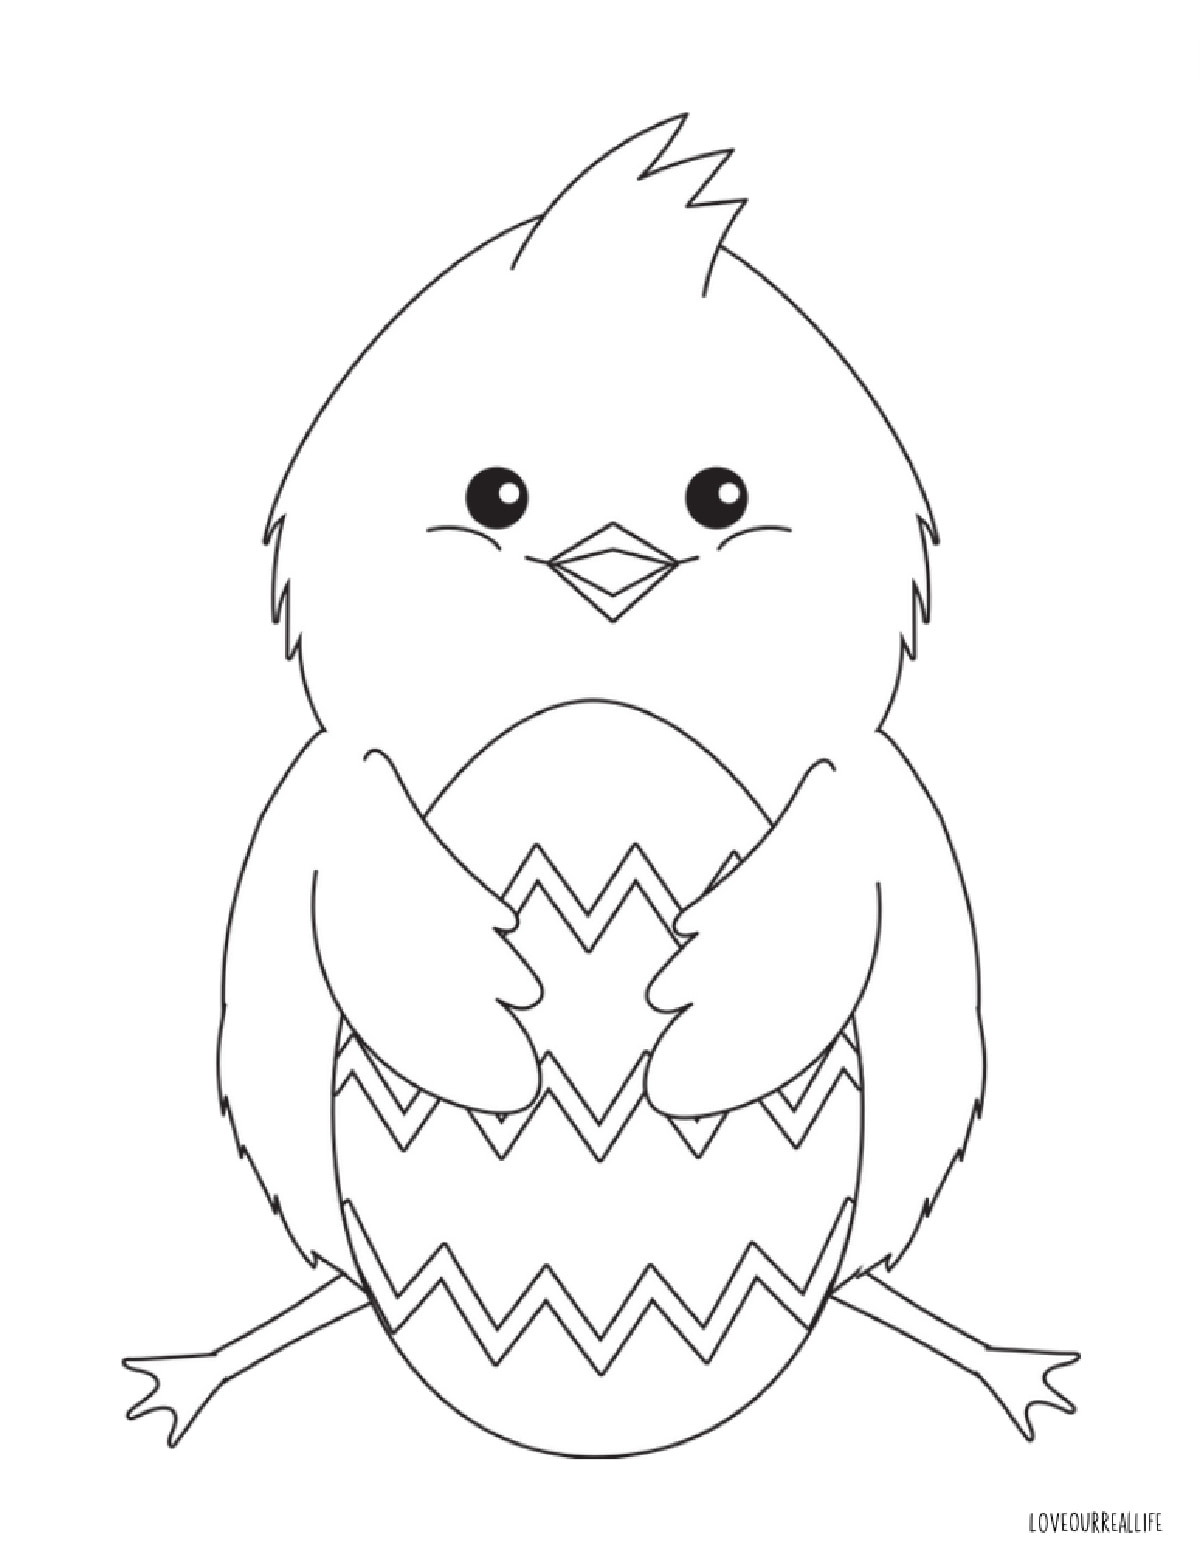 Chick Coloring Pages: Free Printable for Kids ⋆ Love Our Real Life